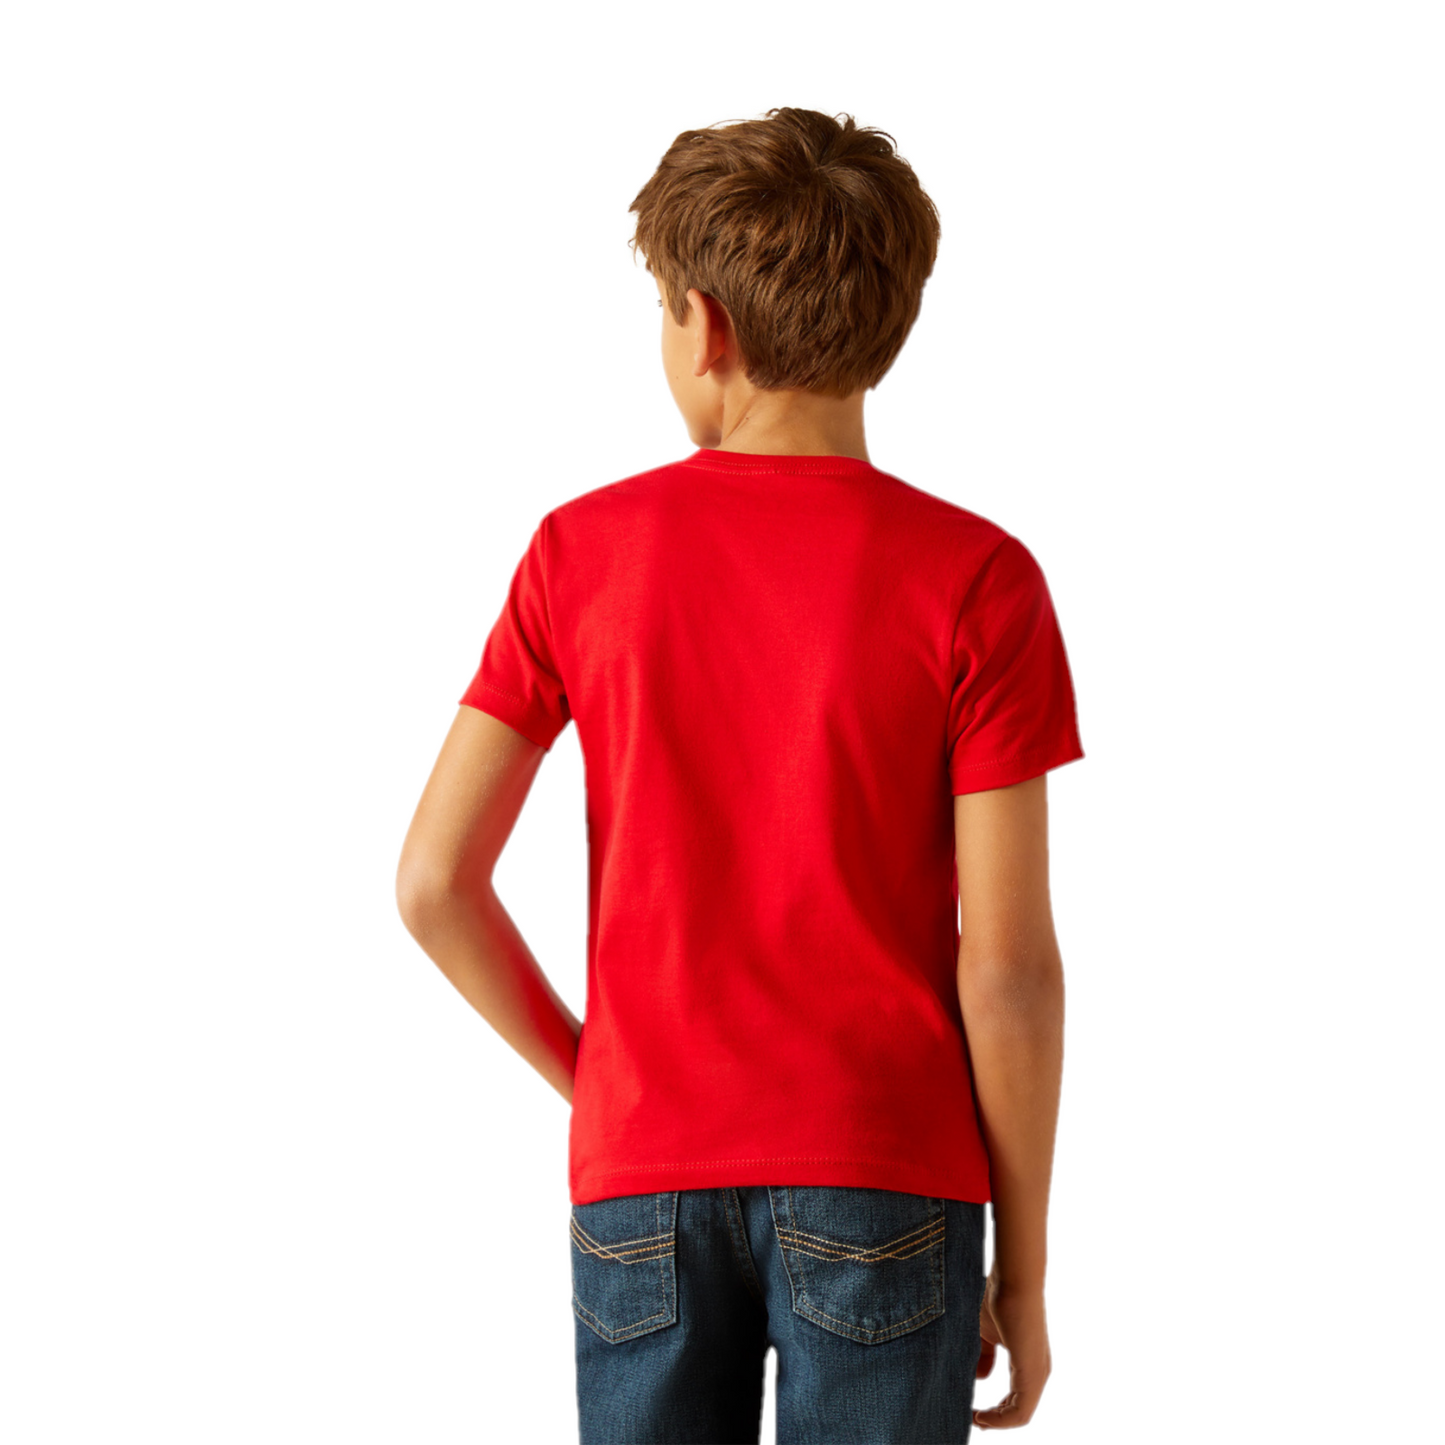 Ariat Youth Boy's Wanted Kid Graphic Red T-Shirt 10051429